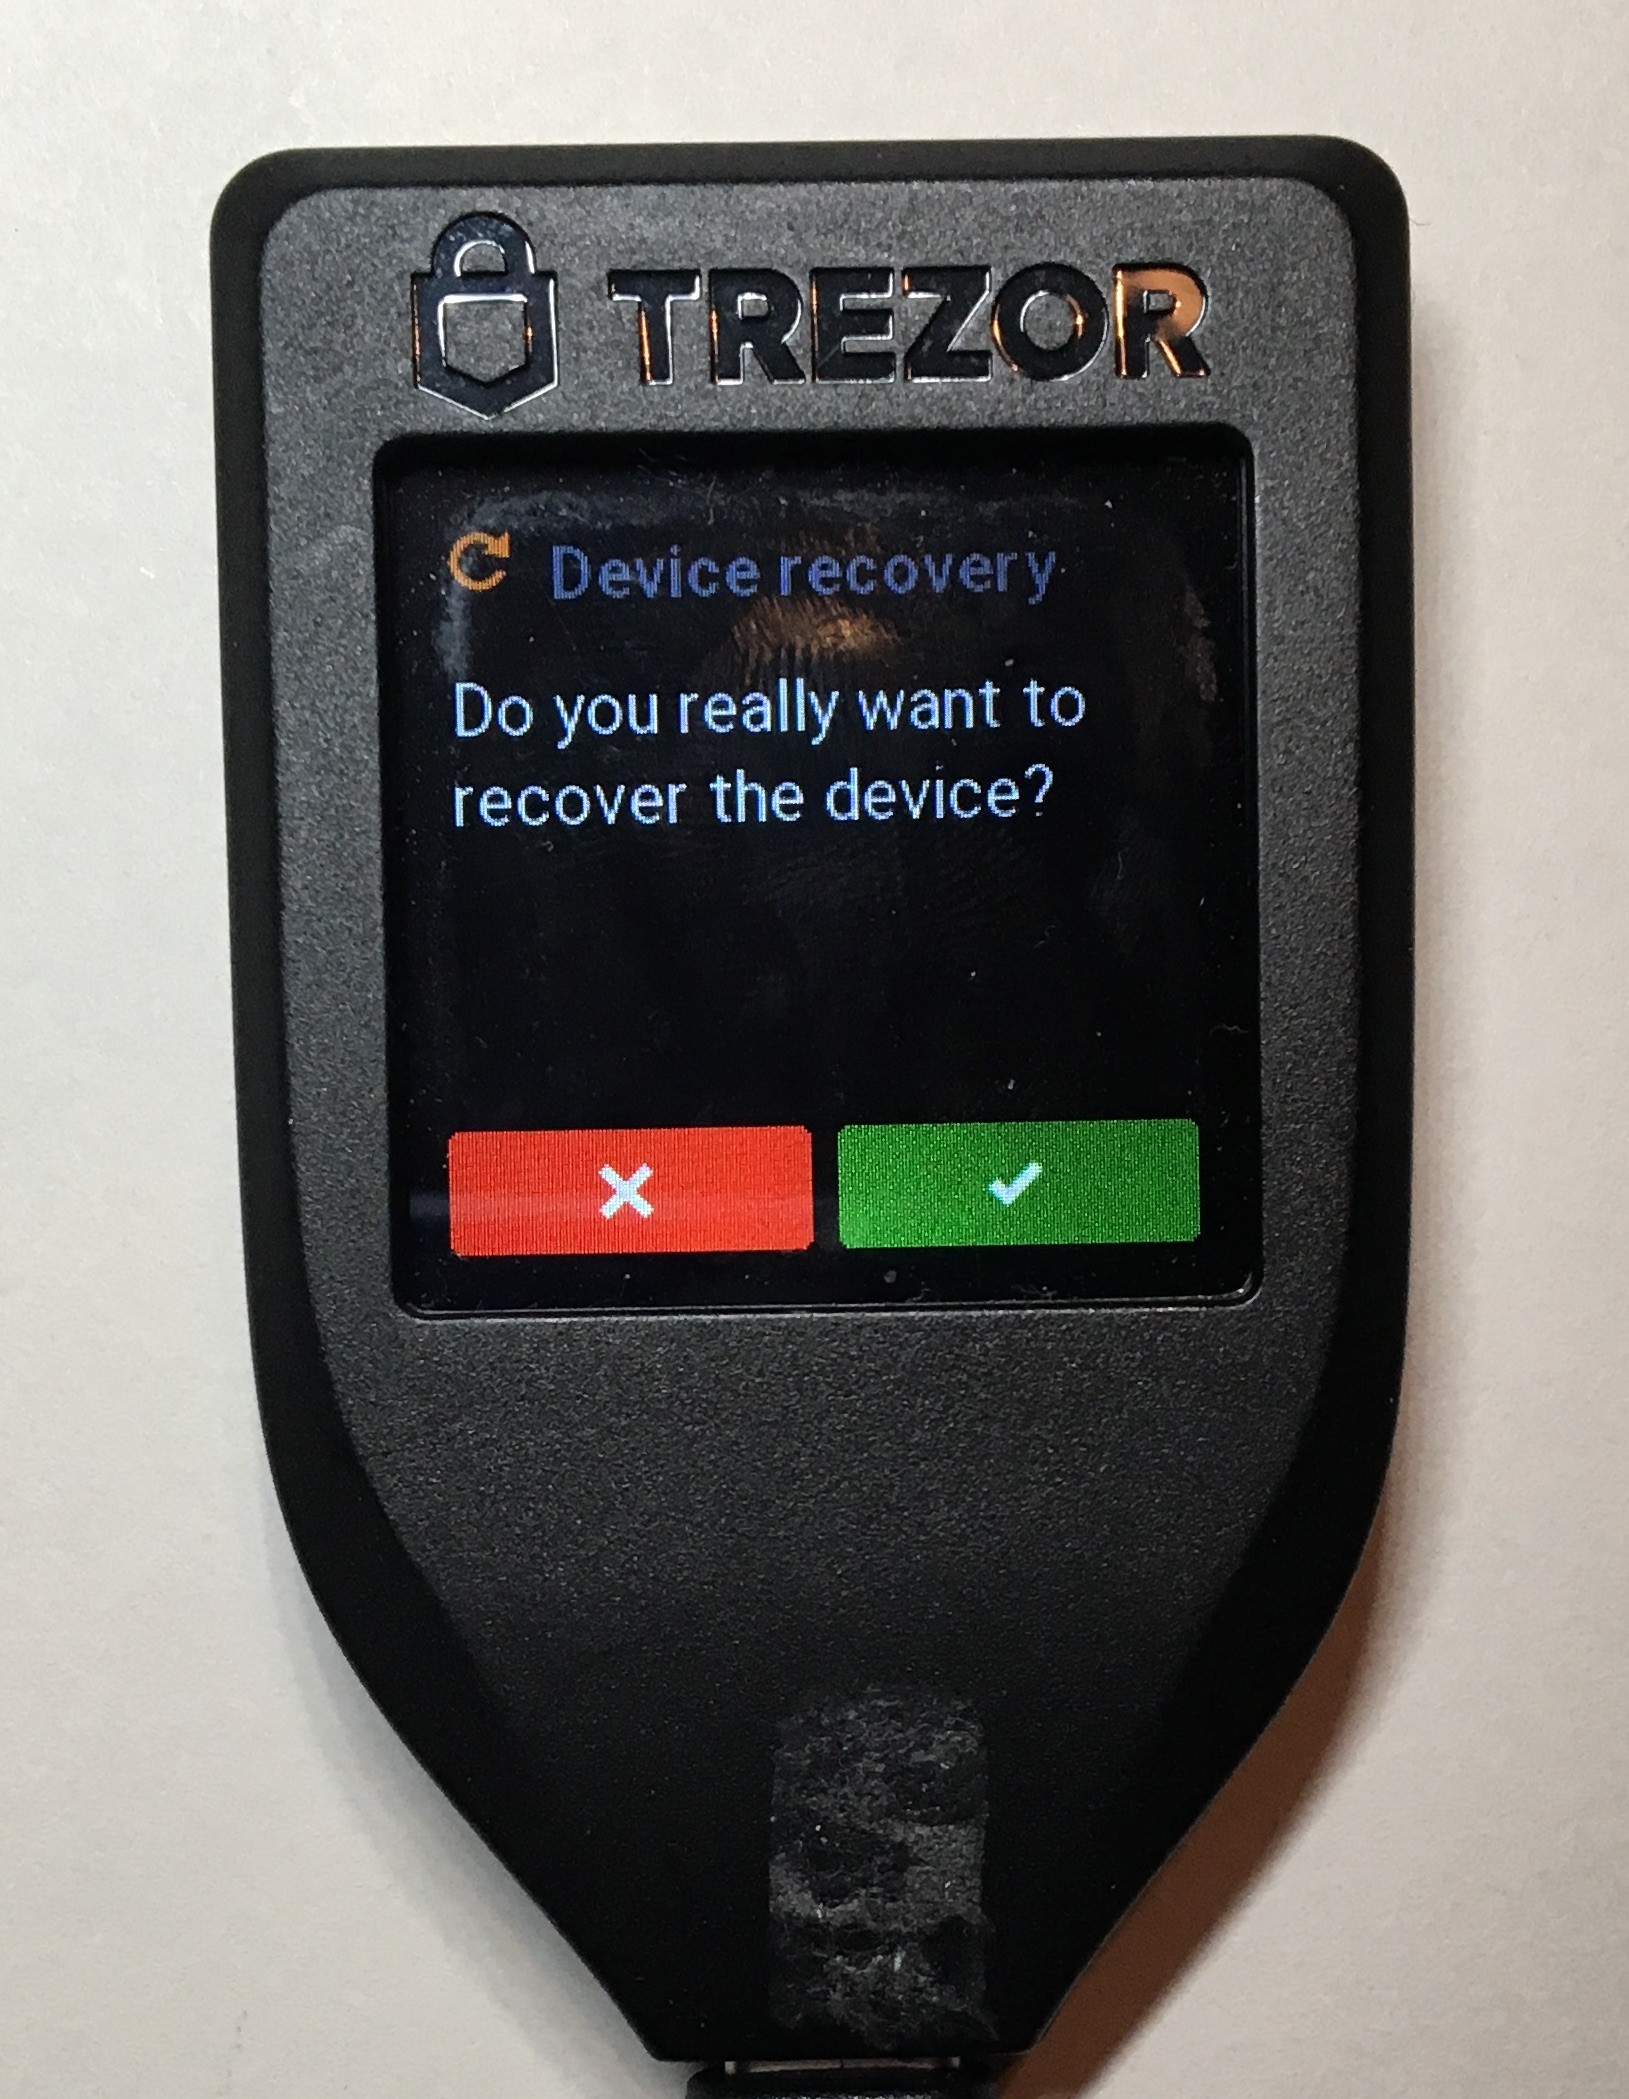 Trezor sales soar 900% amid Ledger's seed recovery controversy